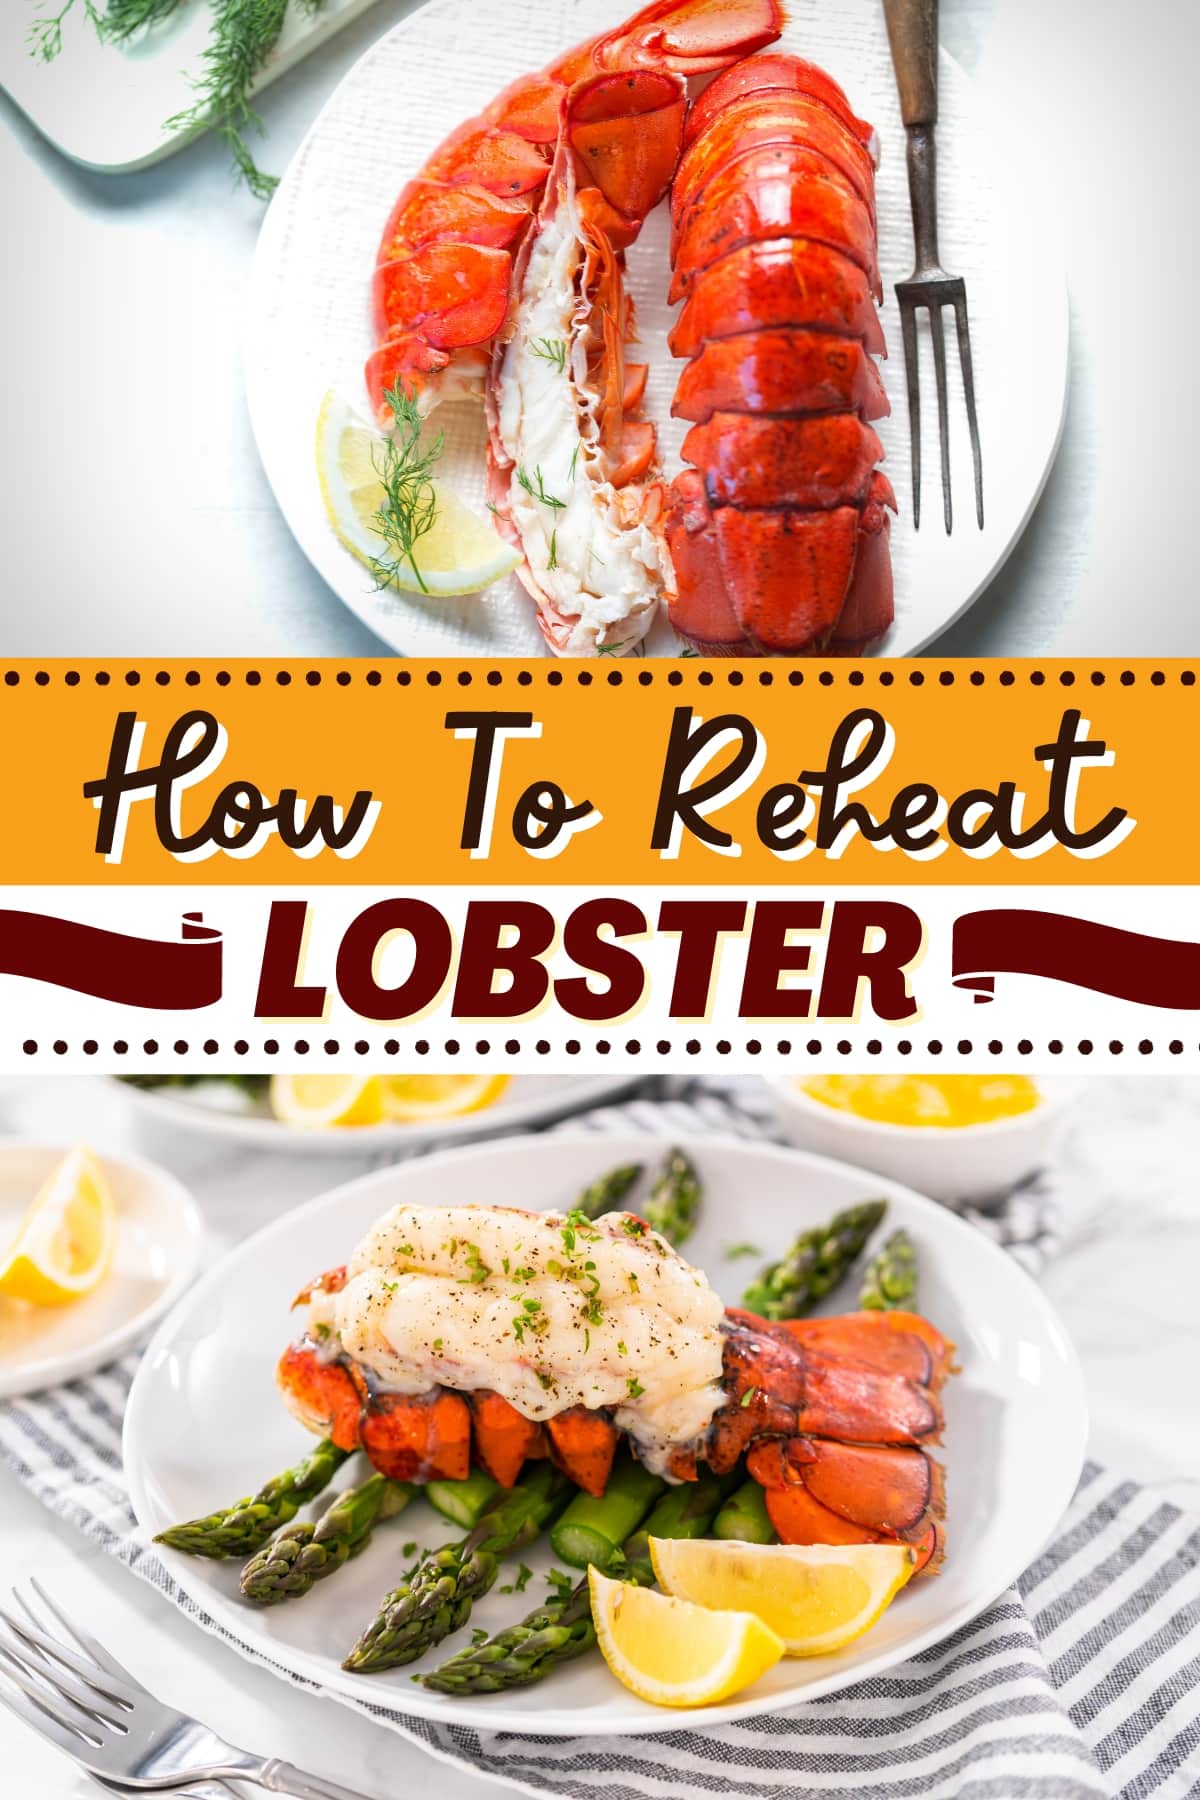 How to Reheat Lobster